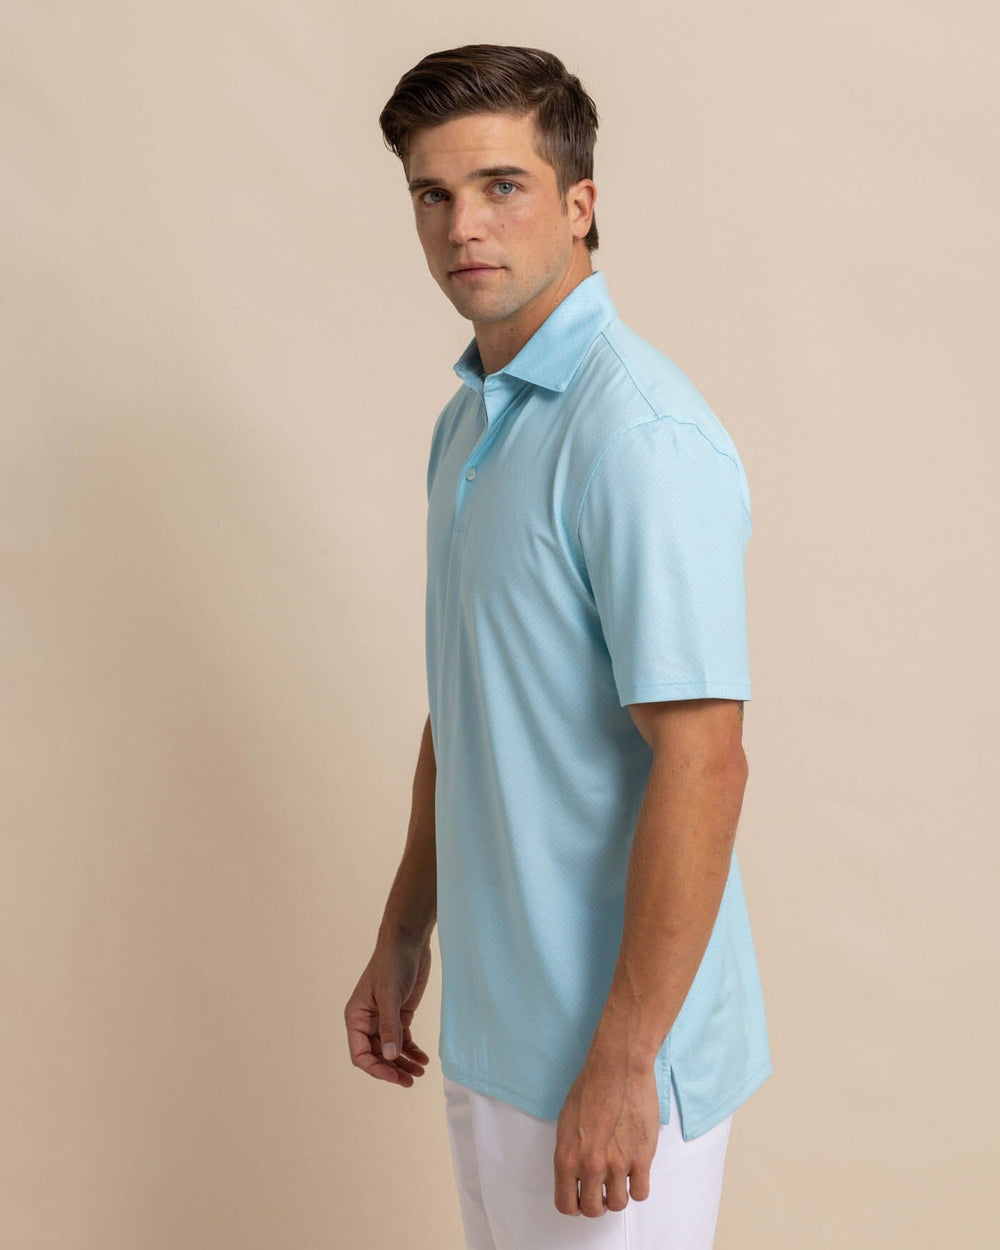 The front view of the Southern Tide Driver Coastal Geo Polo Shirt by Southern Tide - Chilled Blue